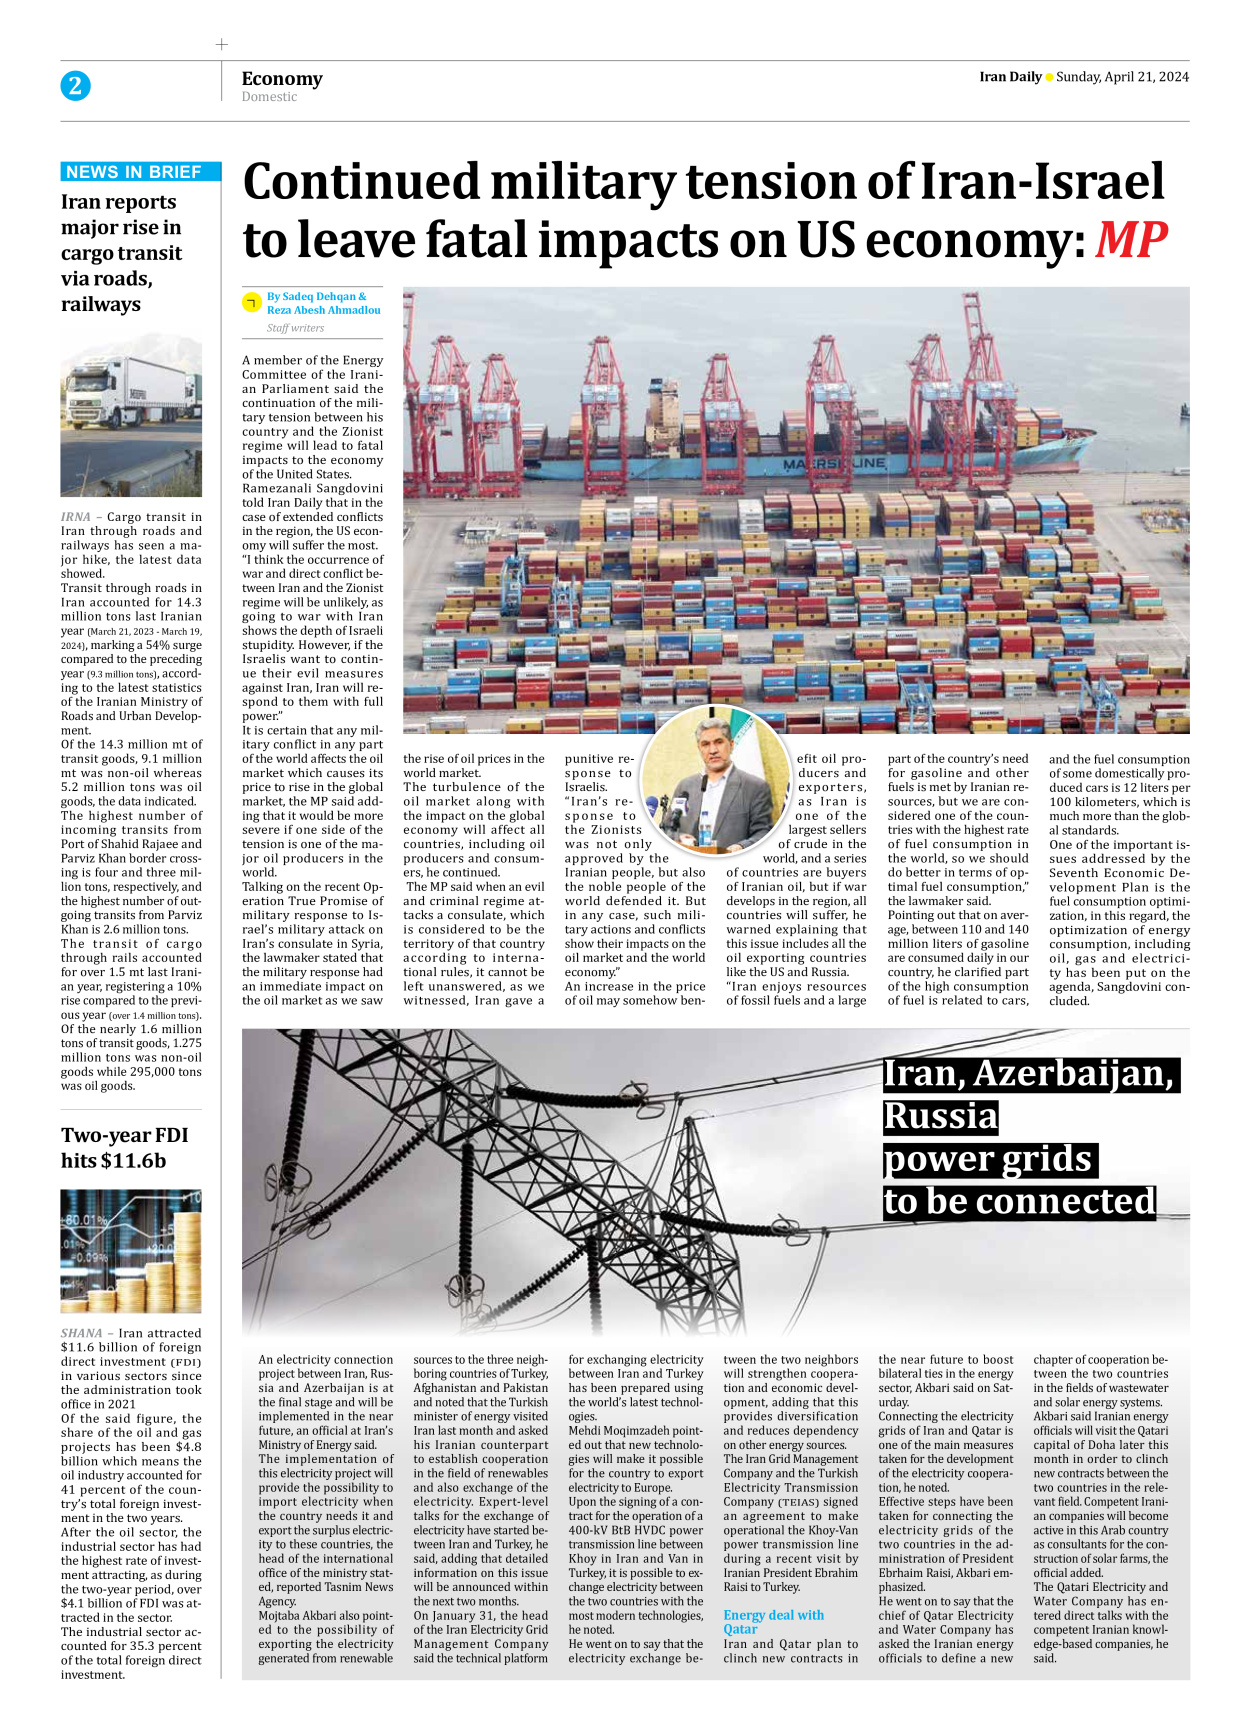 Iran Daily - Number Seven Thousand Five Hundred and Thirty Eight - 21 April 2024 - Page 2